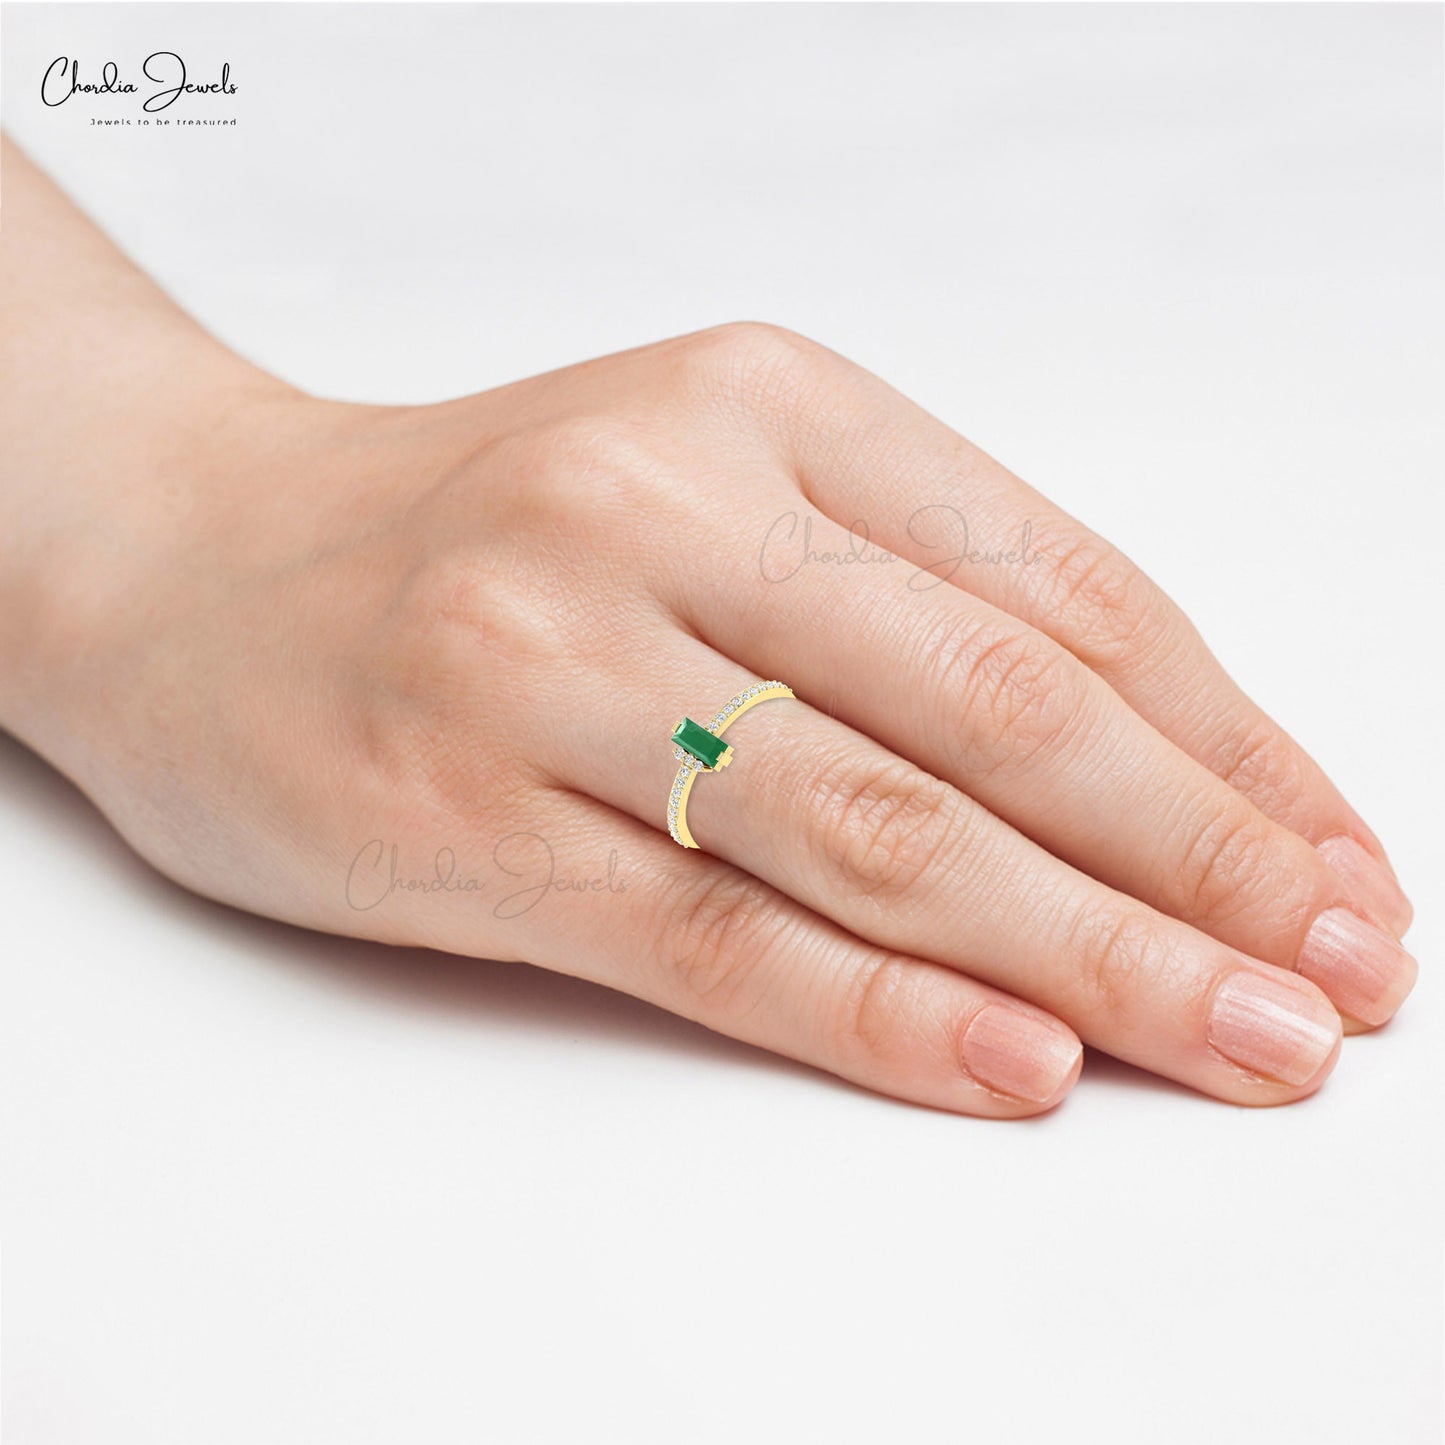 Enhance your personal style with our genuine emerald ring.